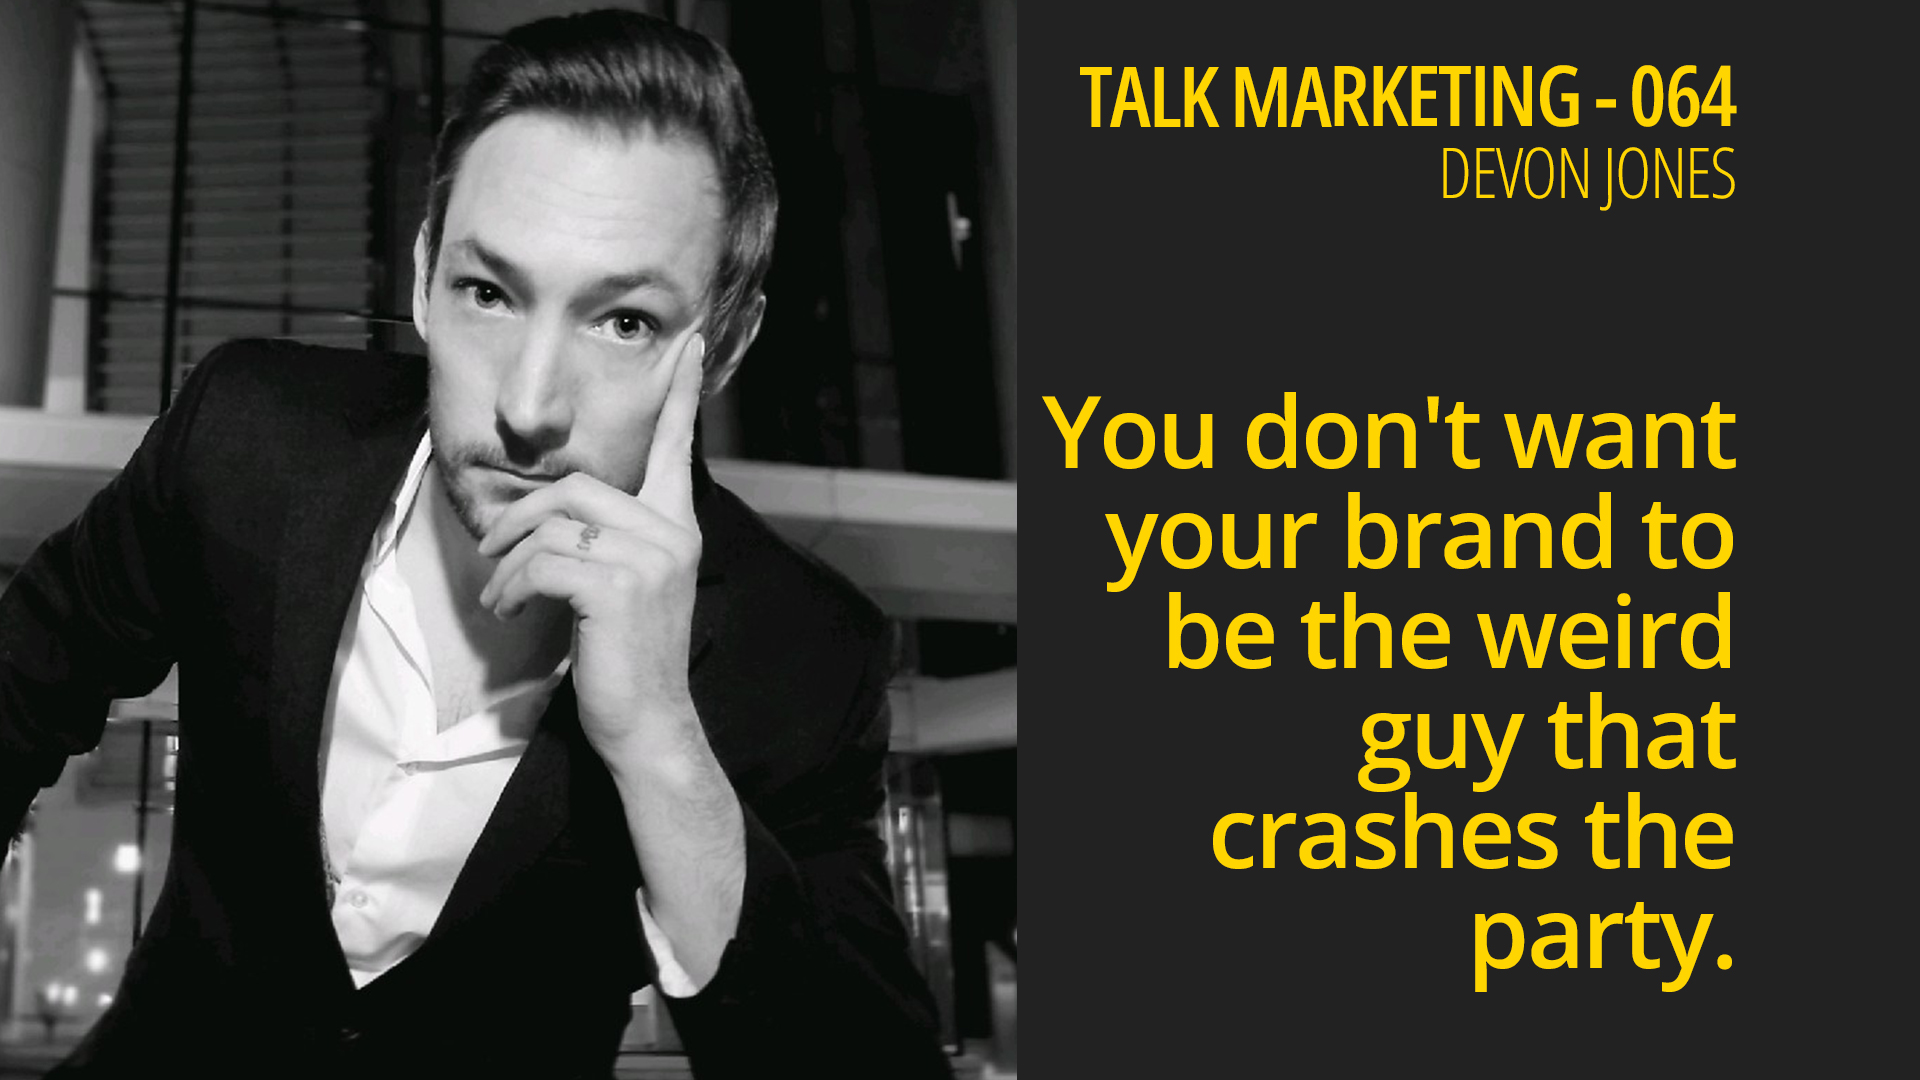 You don’t want your brand to be the weird guy that crashes the party – Talk Marketing 064 – Devon Jones